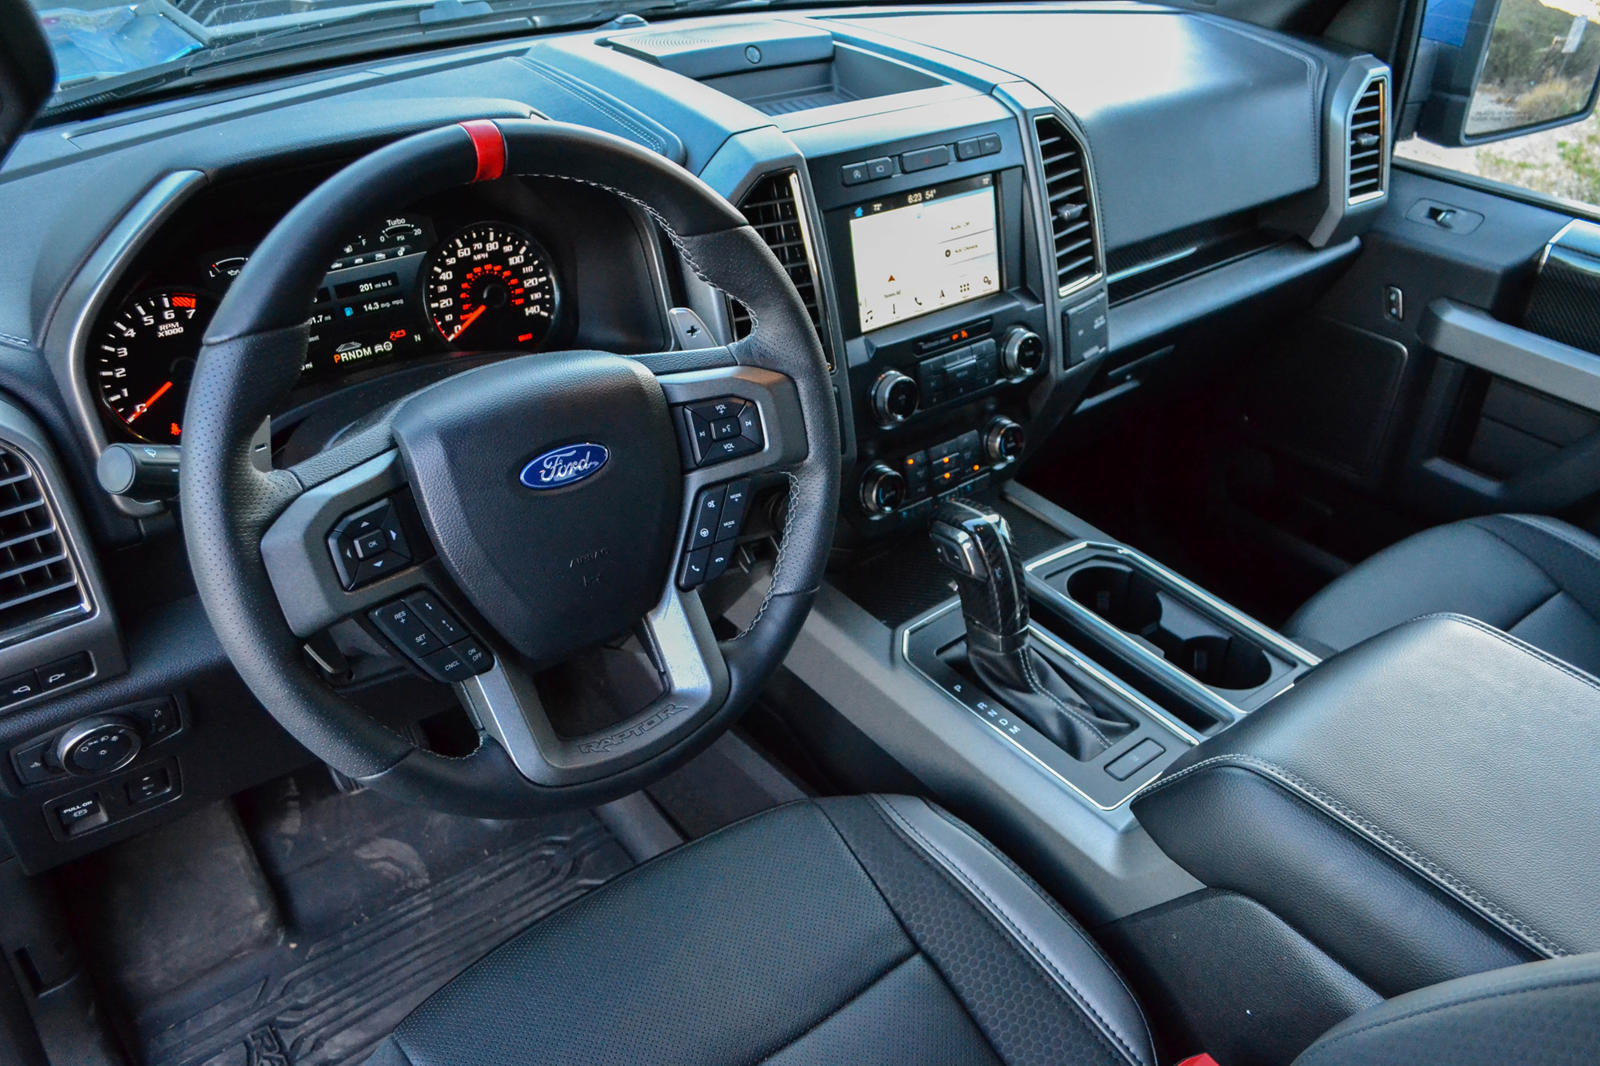 2019 Ford F-150 Review | Expert Reviews | J.D. Power